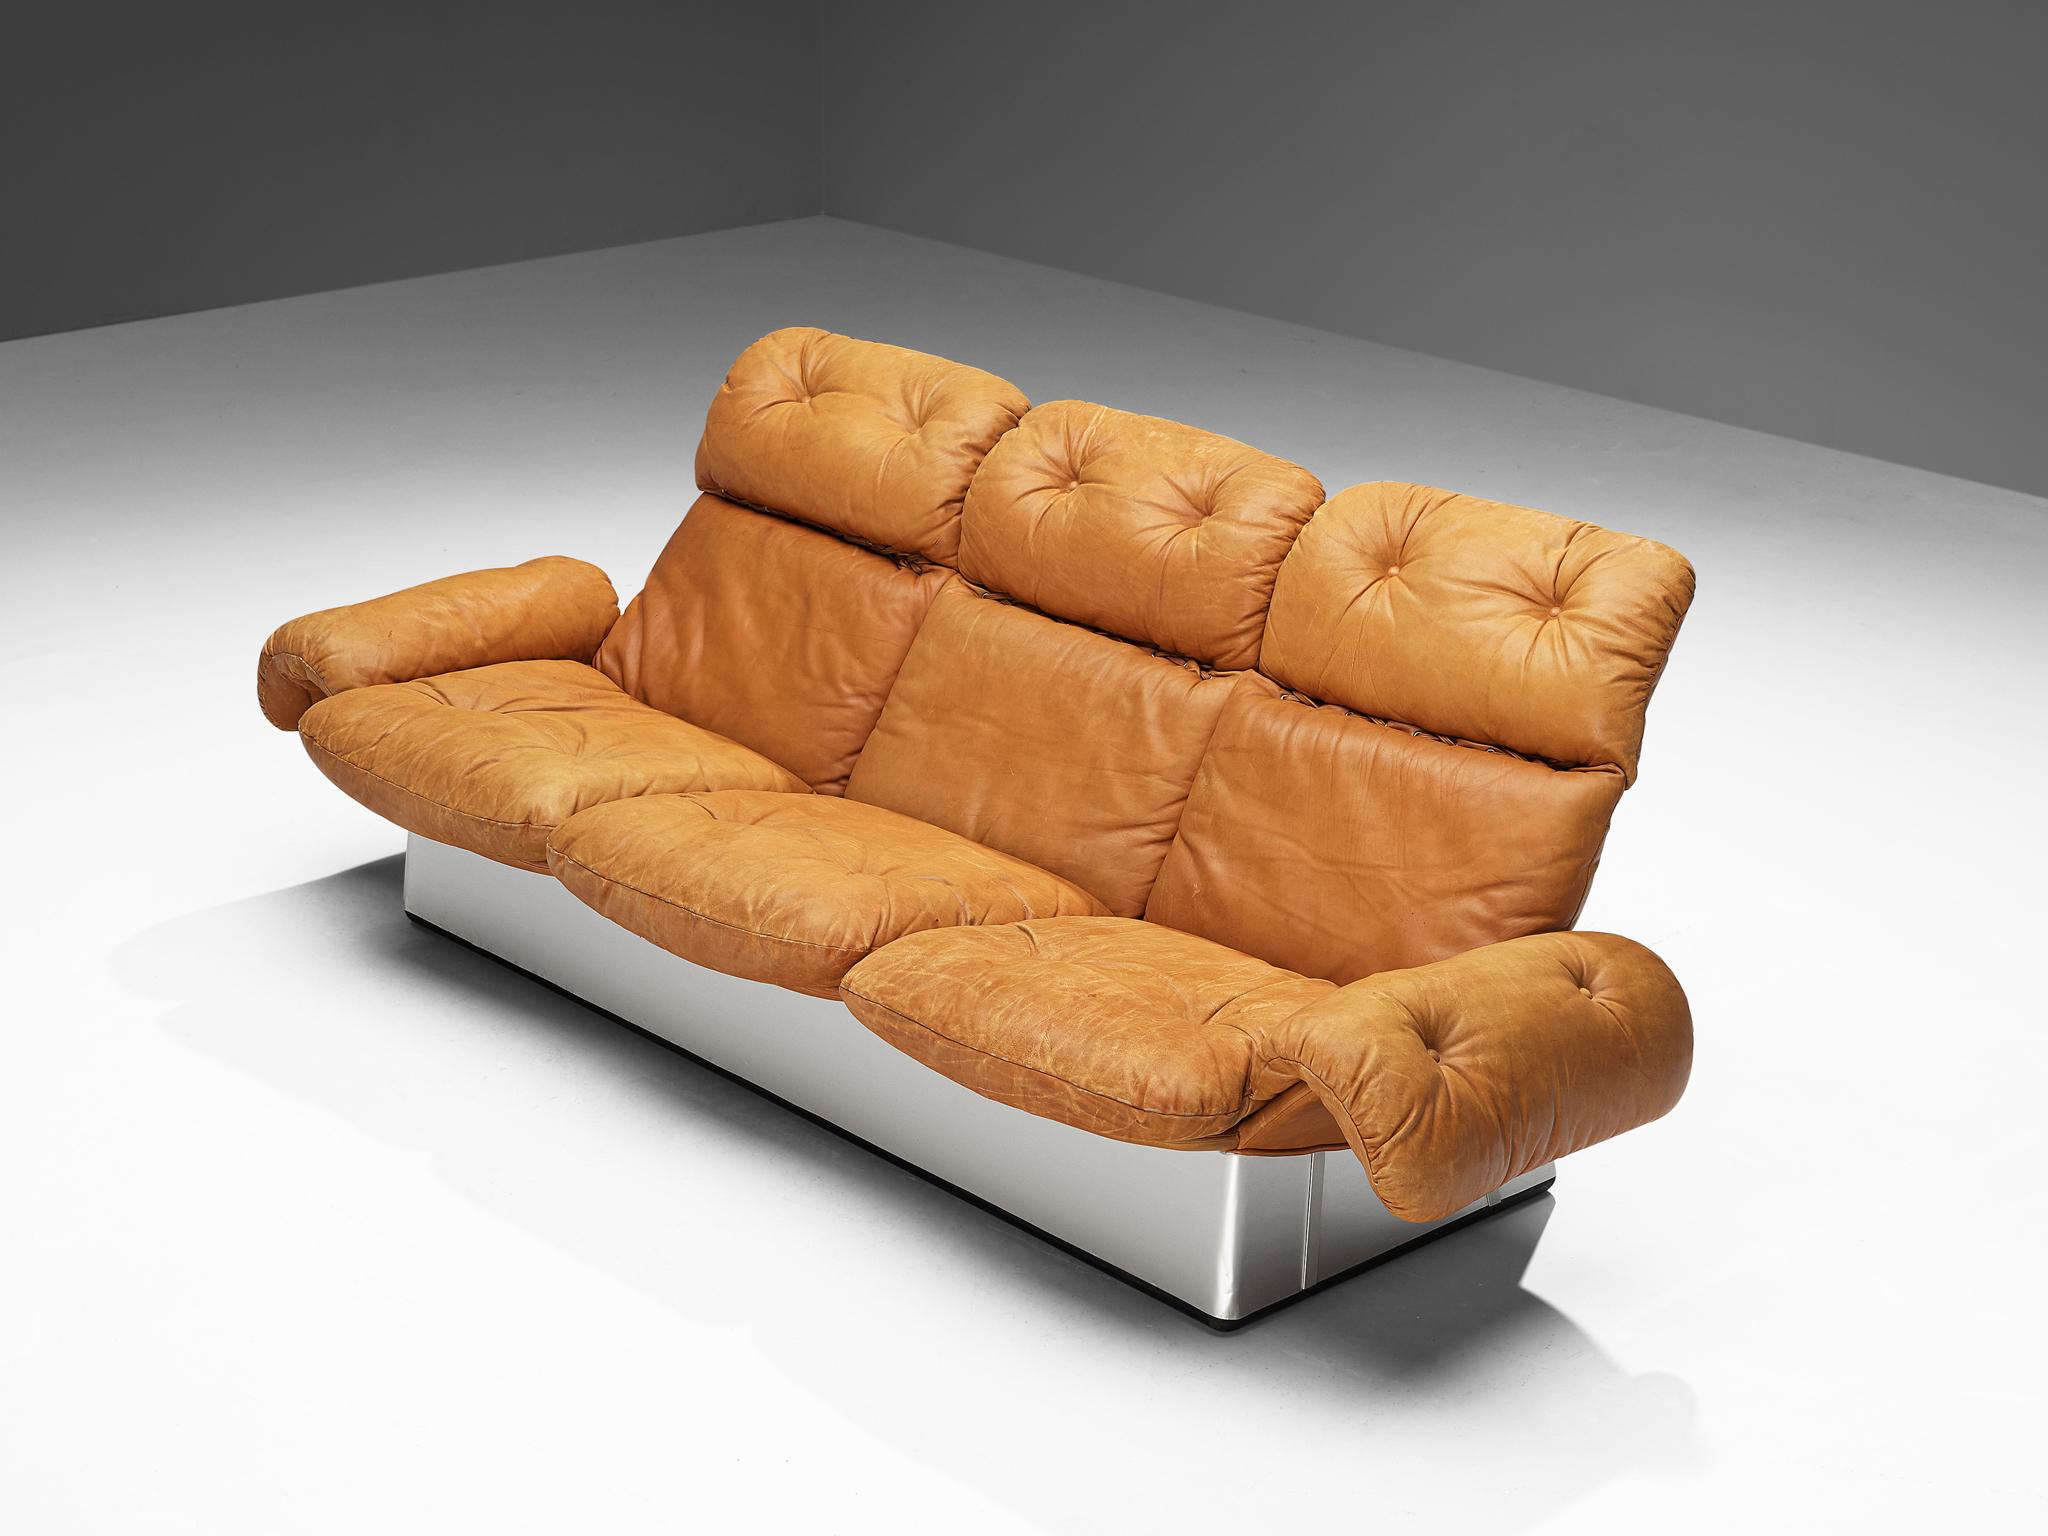 Sofa, aluminum, leather, Italy 1970s

Comfortable sofa made in the 1970s. This sofa strongly represent the essence of furniture design of the 1970s, going beyond the strict conventions of modernism, with the exploration of the different qualities of